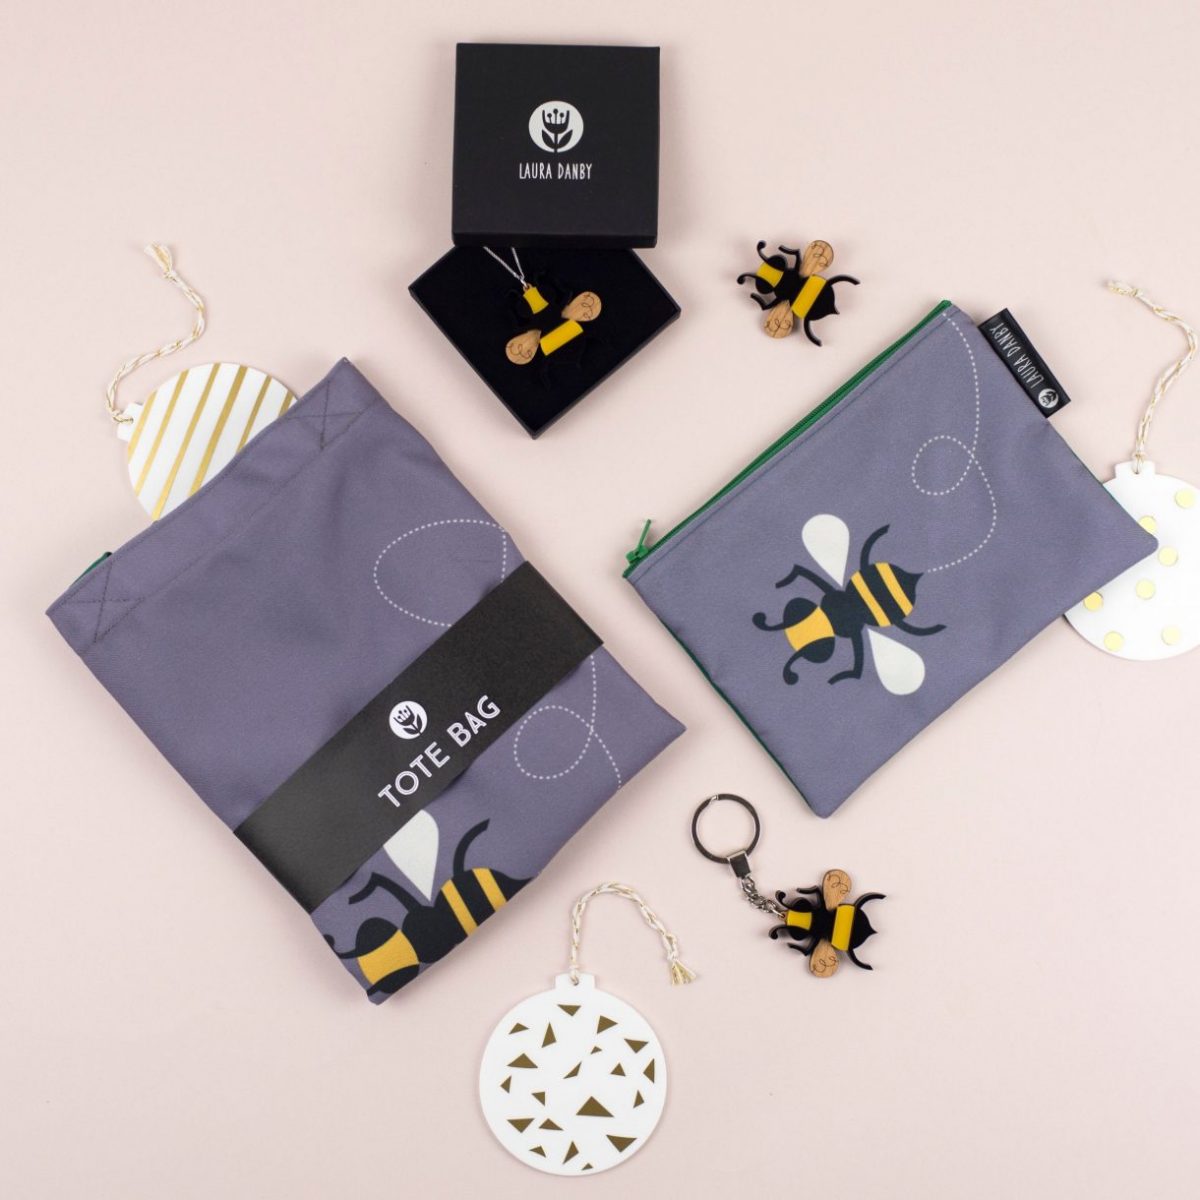 Bumble Bee Gift Set, Tote Bag, Pencil Case, Necklace, Keyring & Brooch Gift Set For Her, For Women, For Christmas